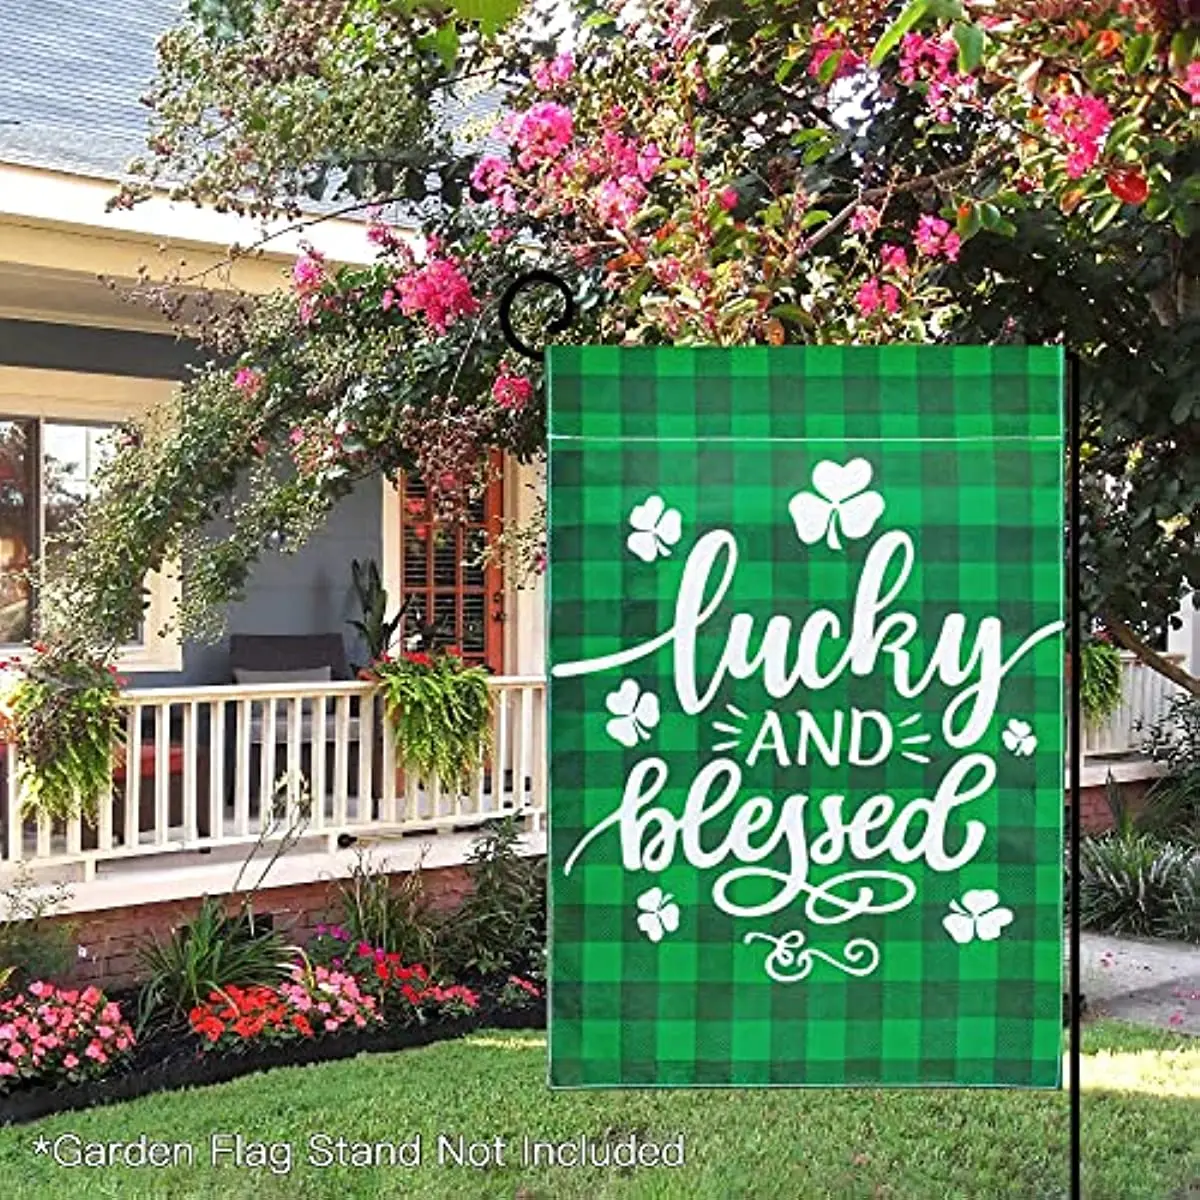 

St Patricks Day Garden Flag St.patrick's Day Decorations Lucky and Blessed Shamrock Outdoor Double Sided Garden Flag Clover